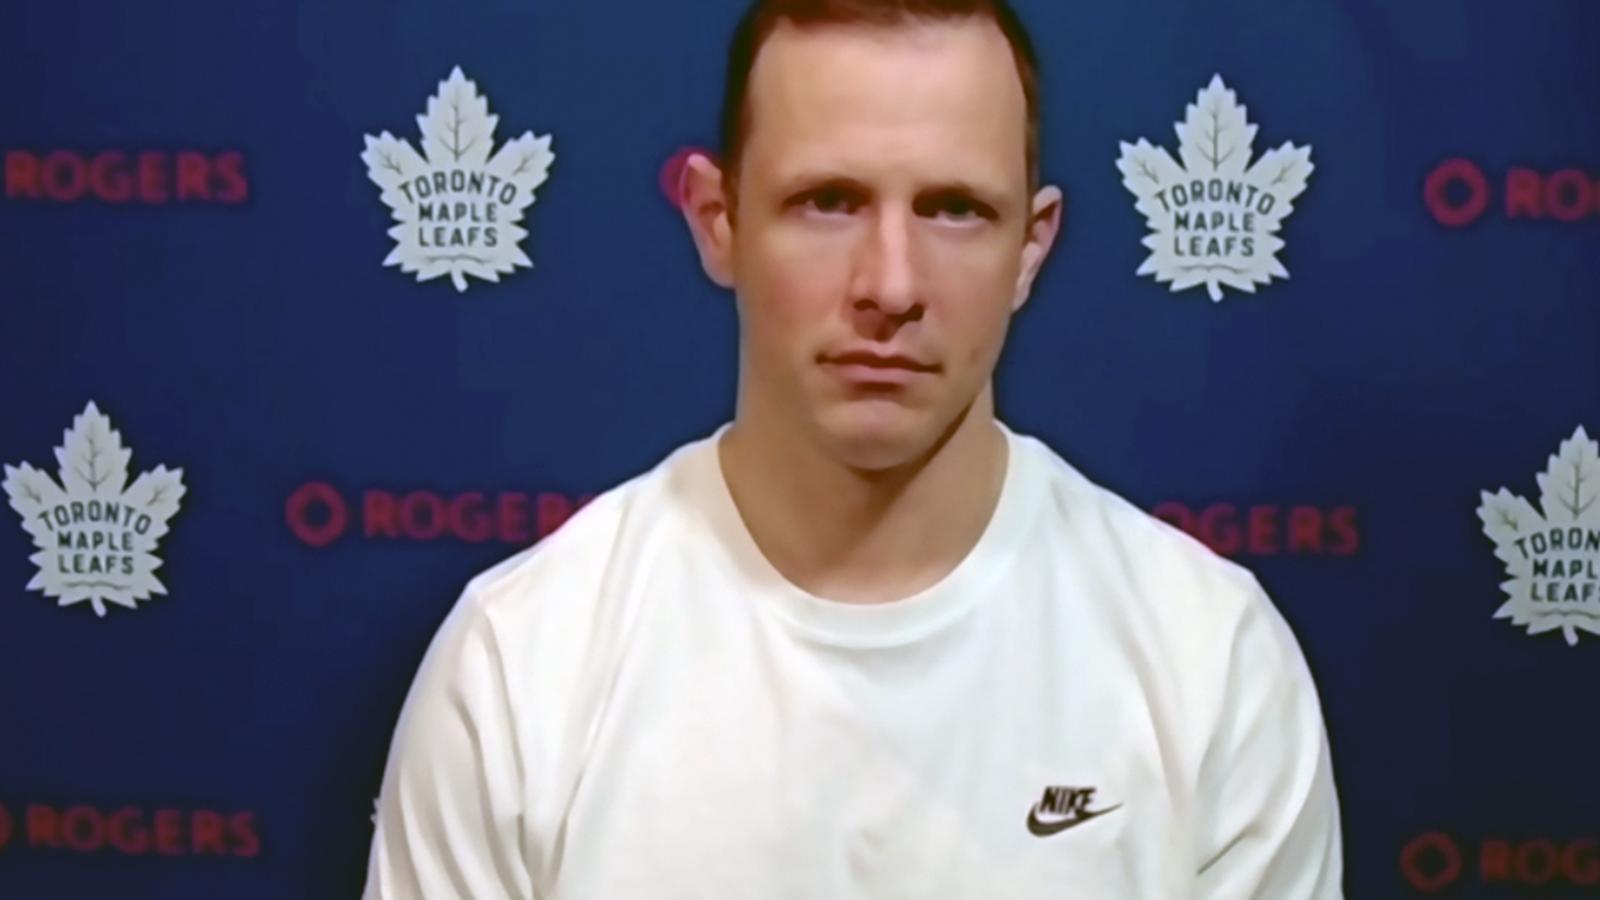 Spezza plans on returning to Leafs, calls this season “unfinished business”